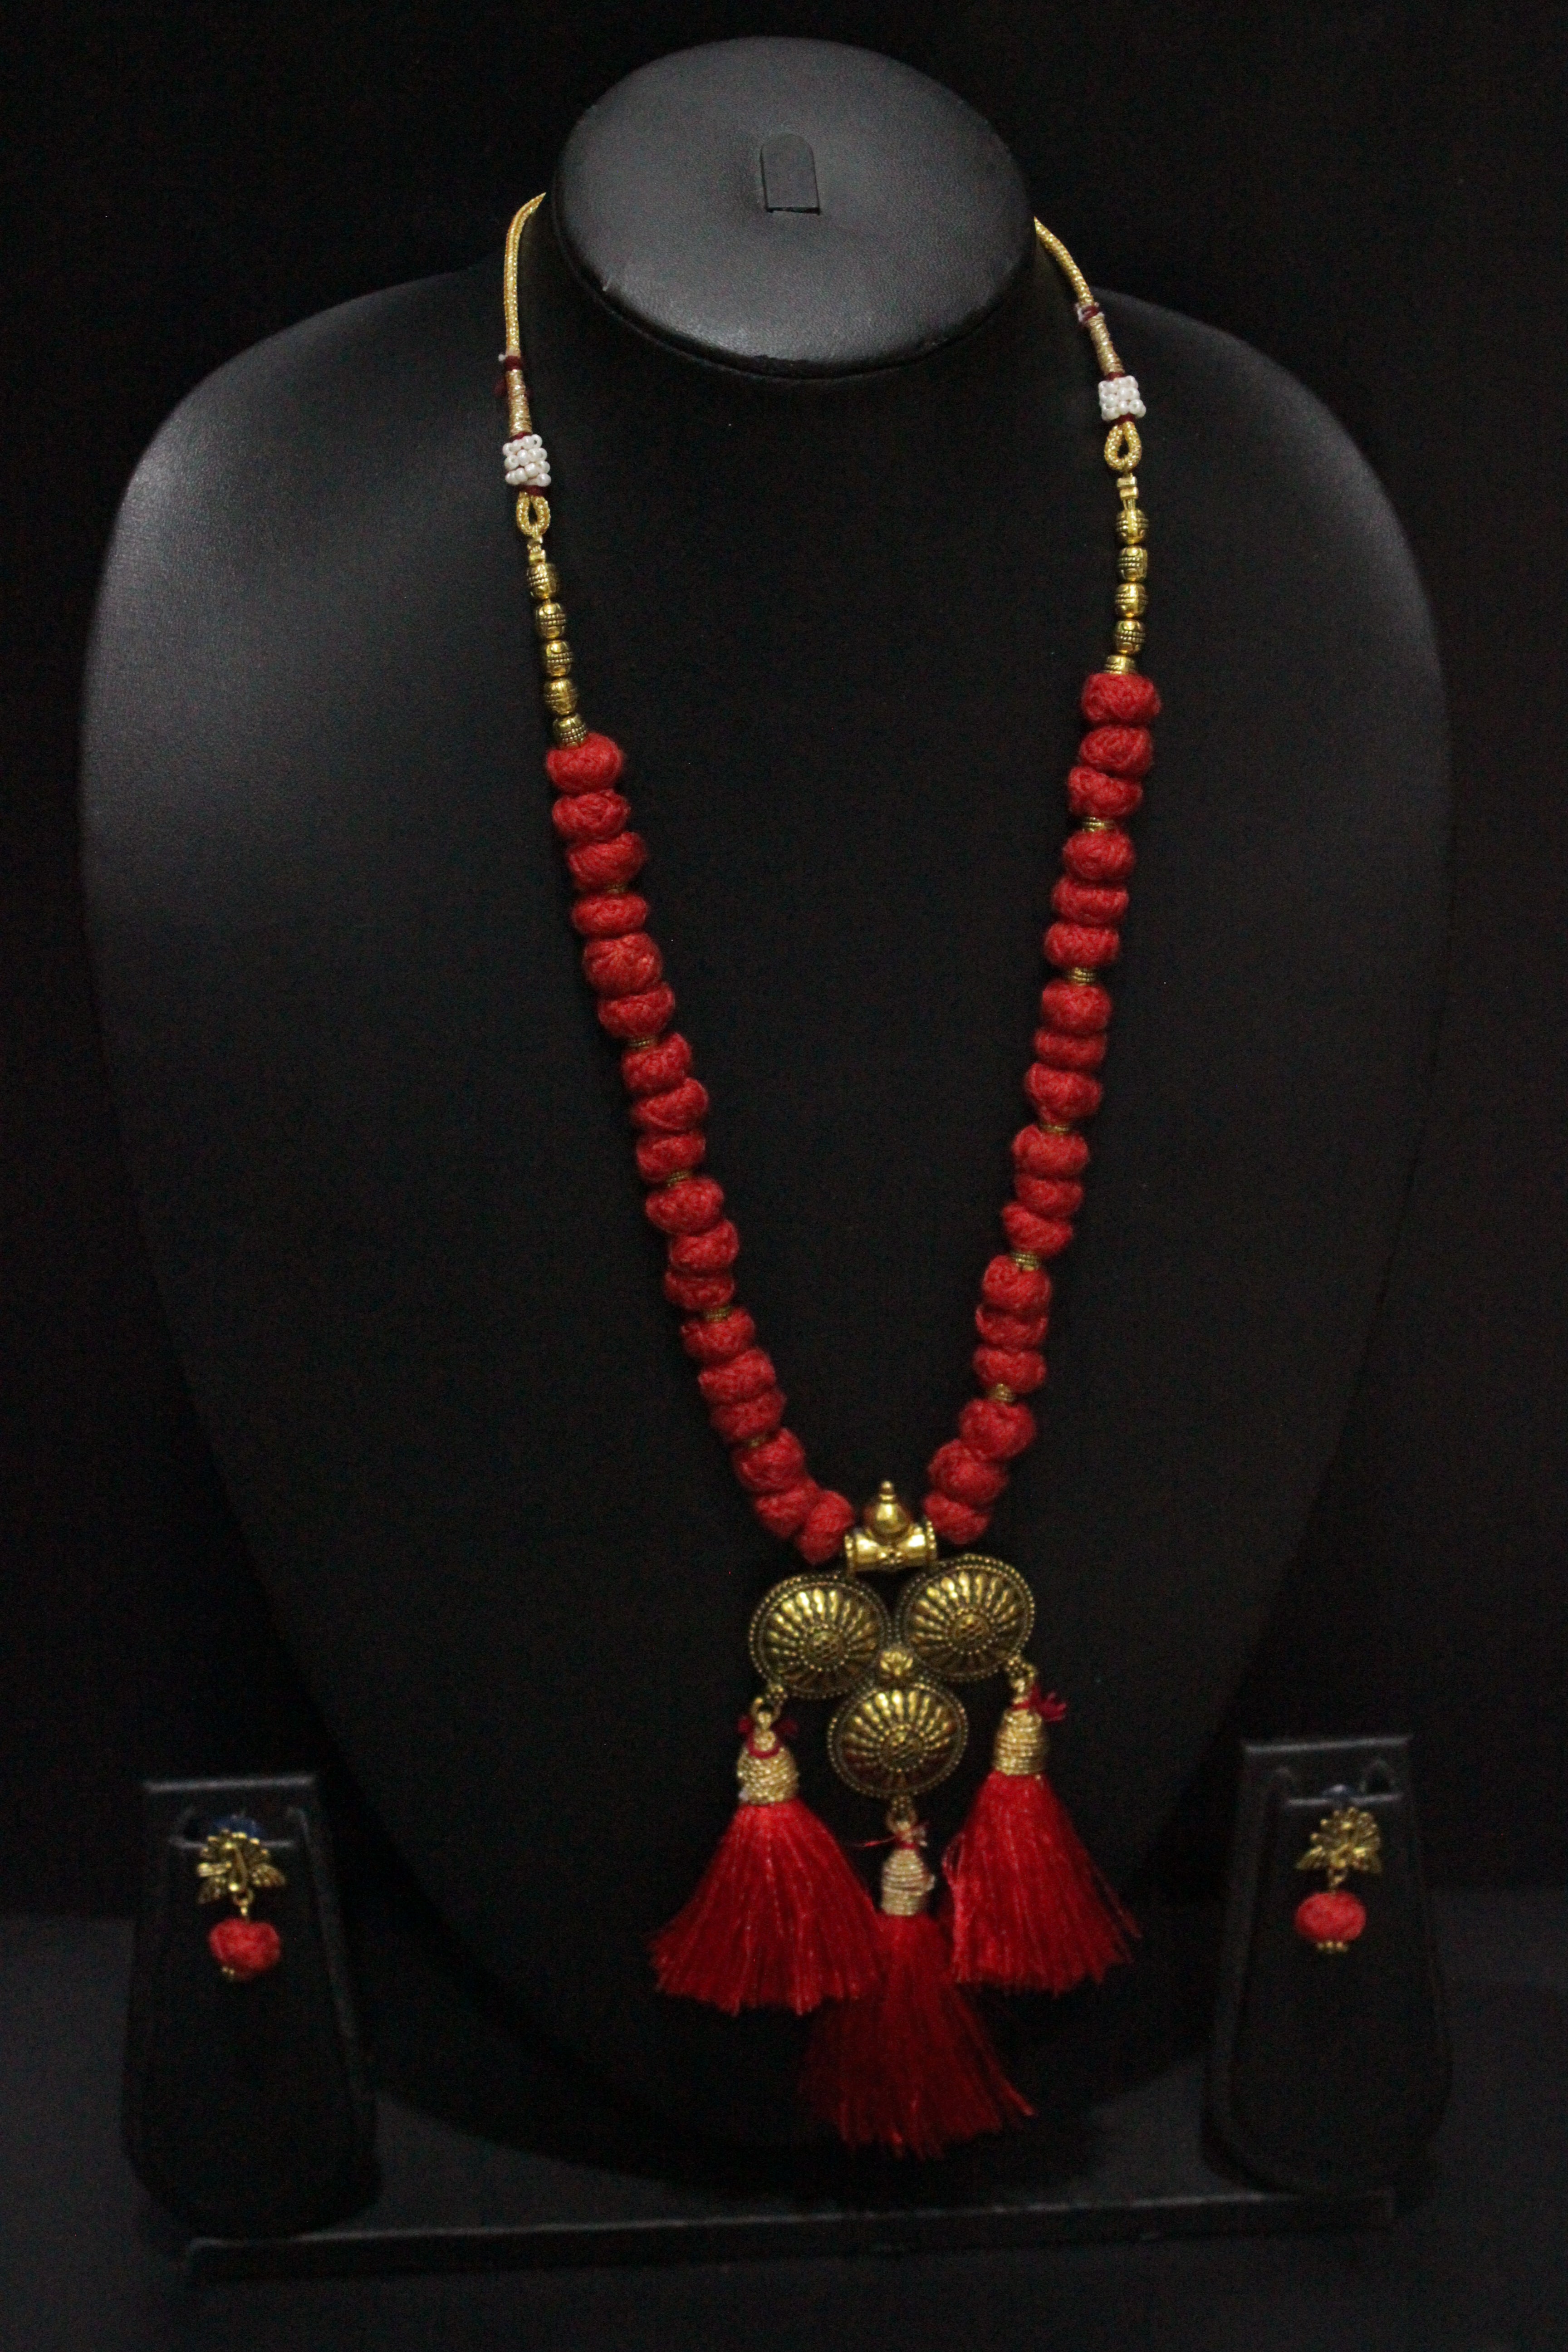 Antique Gold Finish Choker Necklace Set with Fabric Beads Closure and Pom Pom Ends